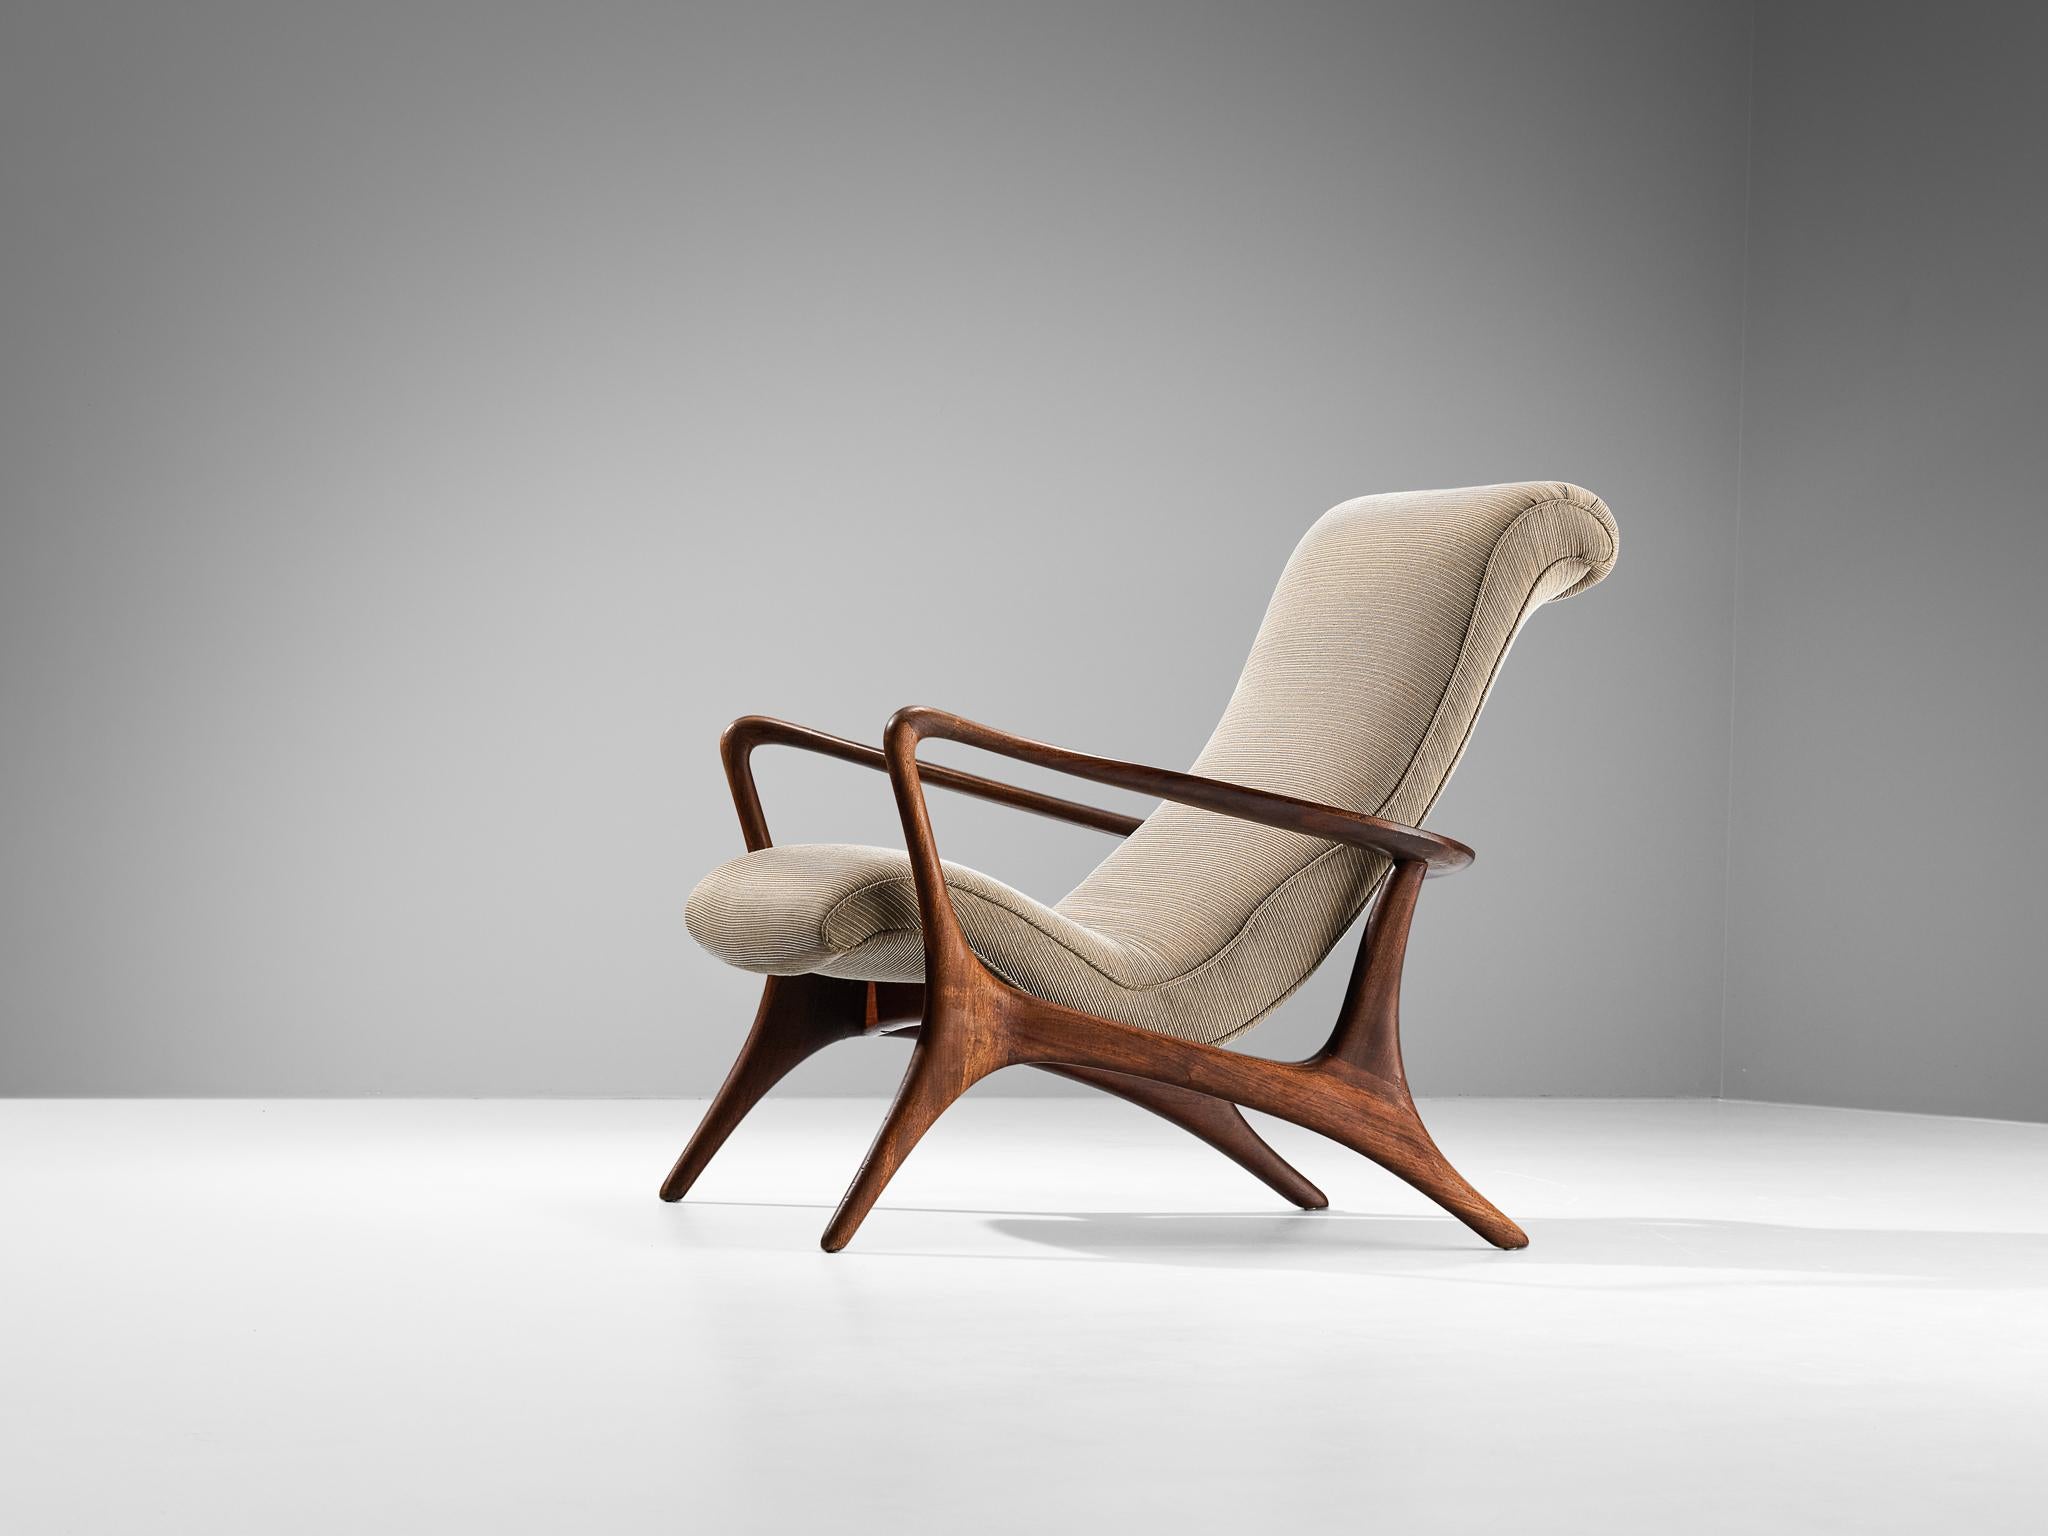 Vladimir Kagan for Dreyfuss, 'Contour' lounge chair, fabric, walnut, United States, 1953

Created in 1953, this 'Contour' armchair is designed by Vladimir Kagan for Kagan-Dreyfuss Collection. The pure beauty of nature is truly what is on show with